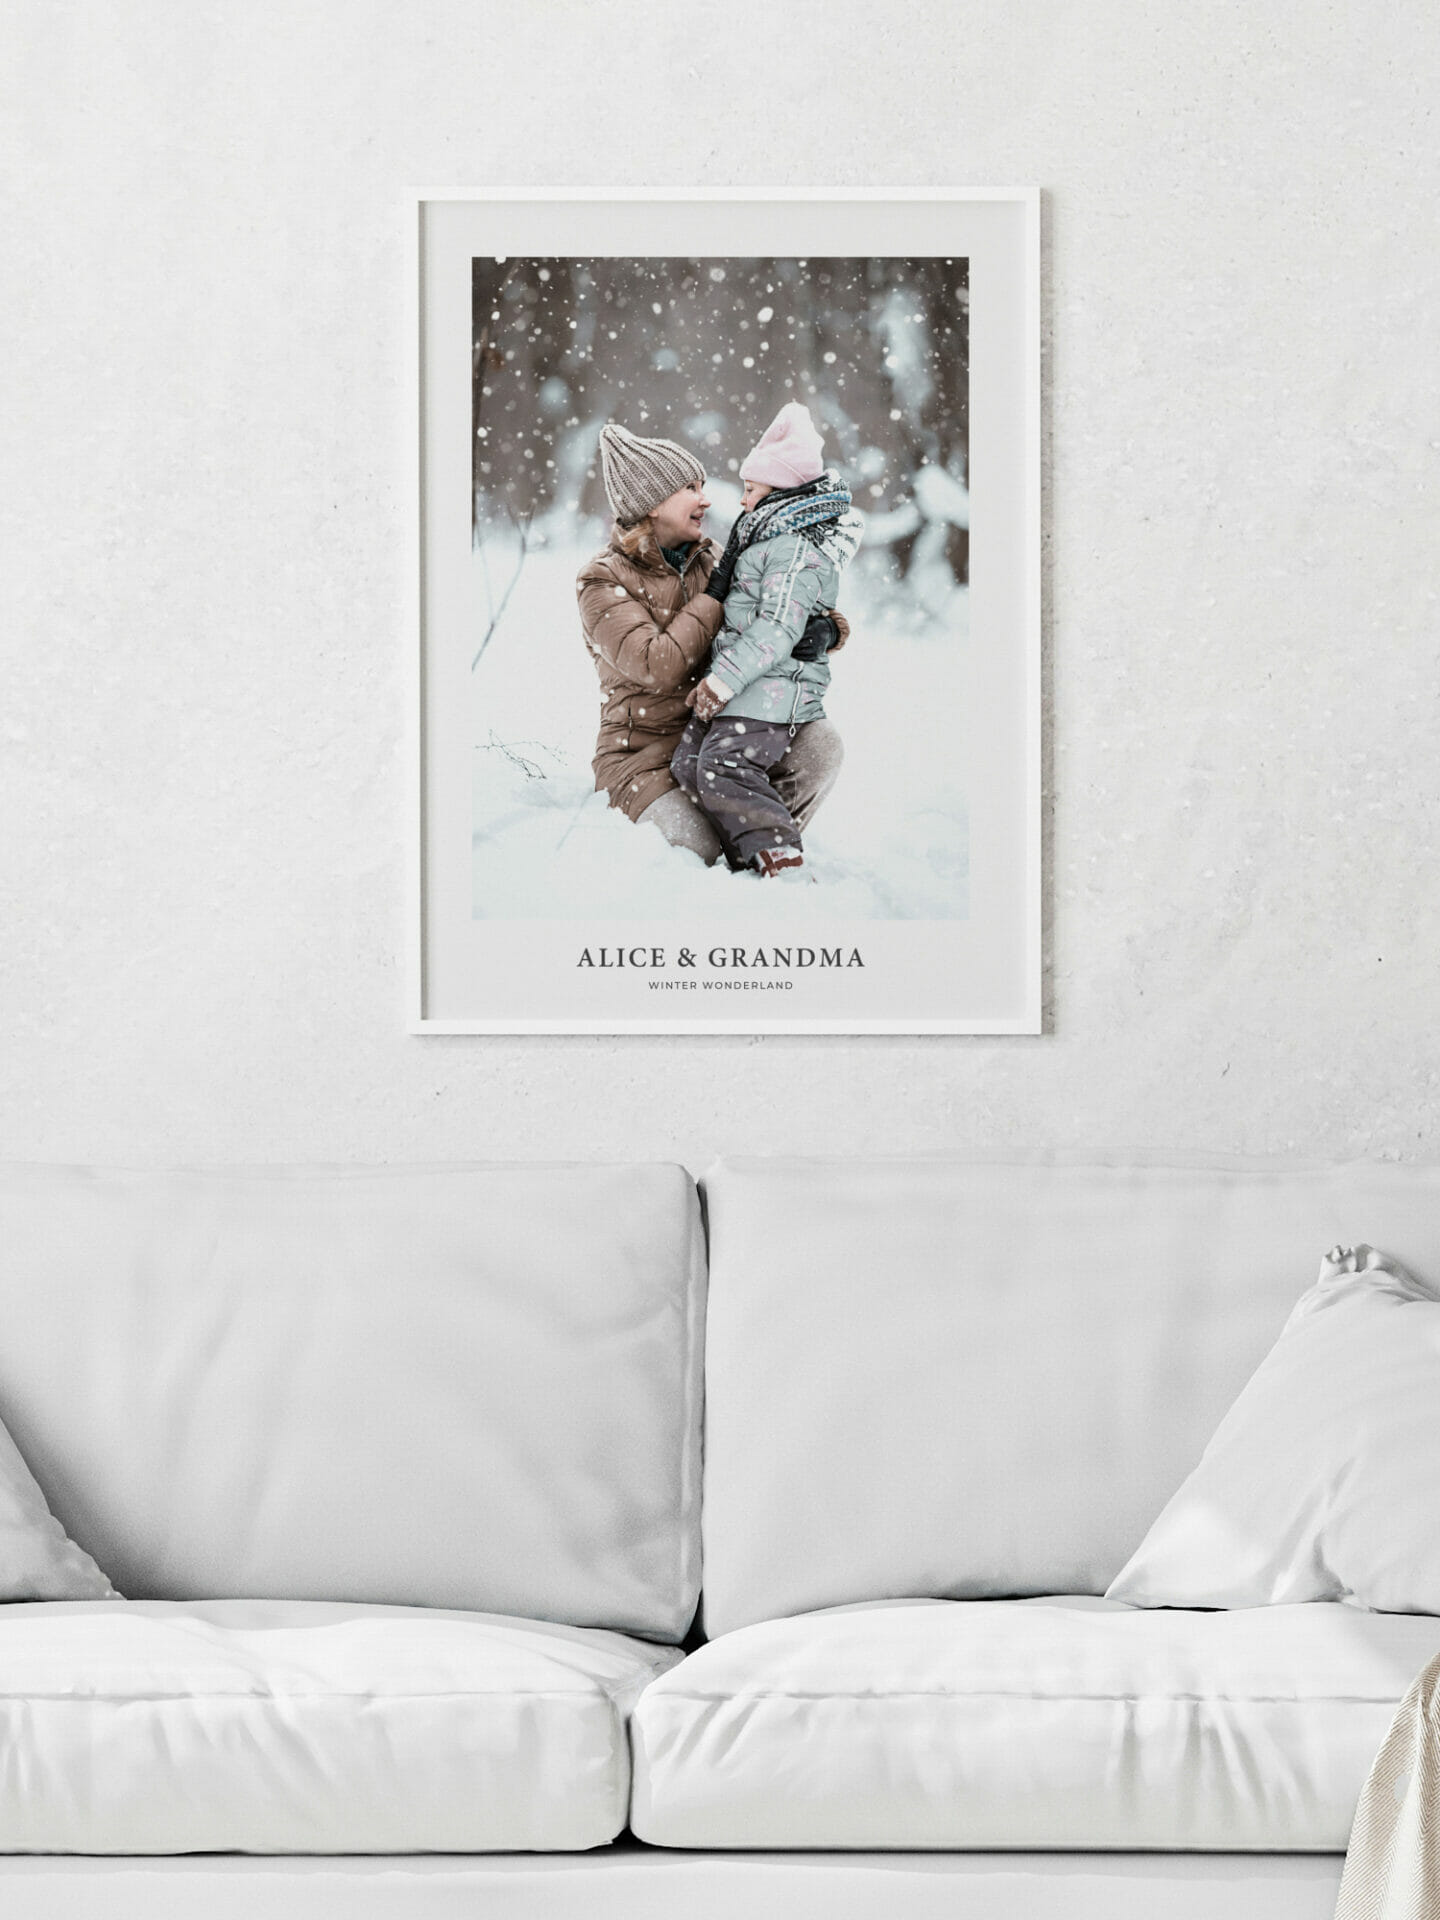 Interior with poster of girl and grandma in snow